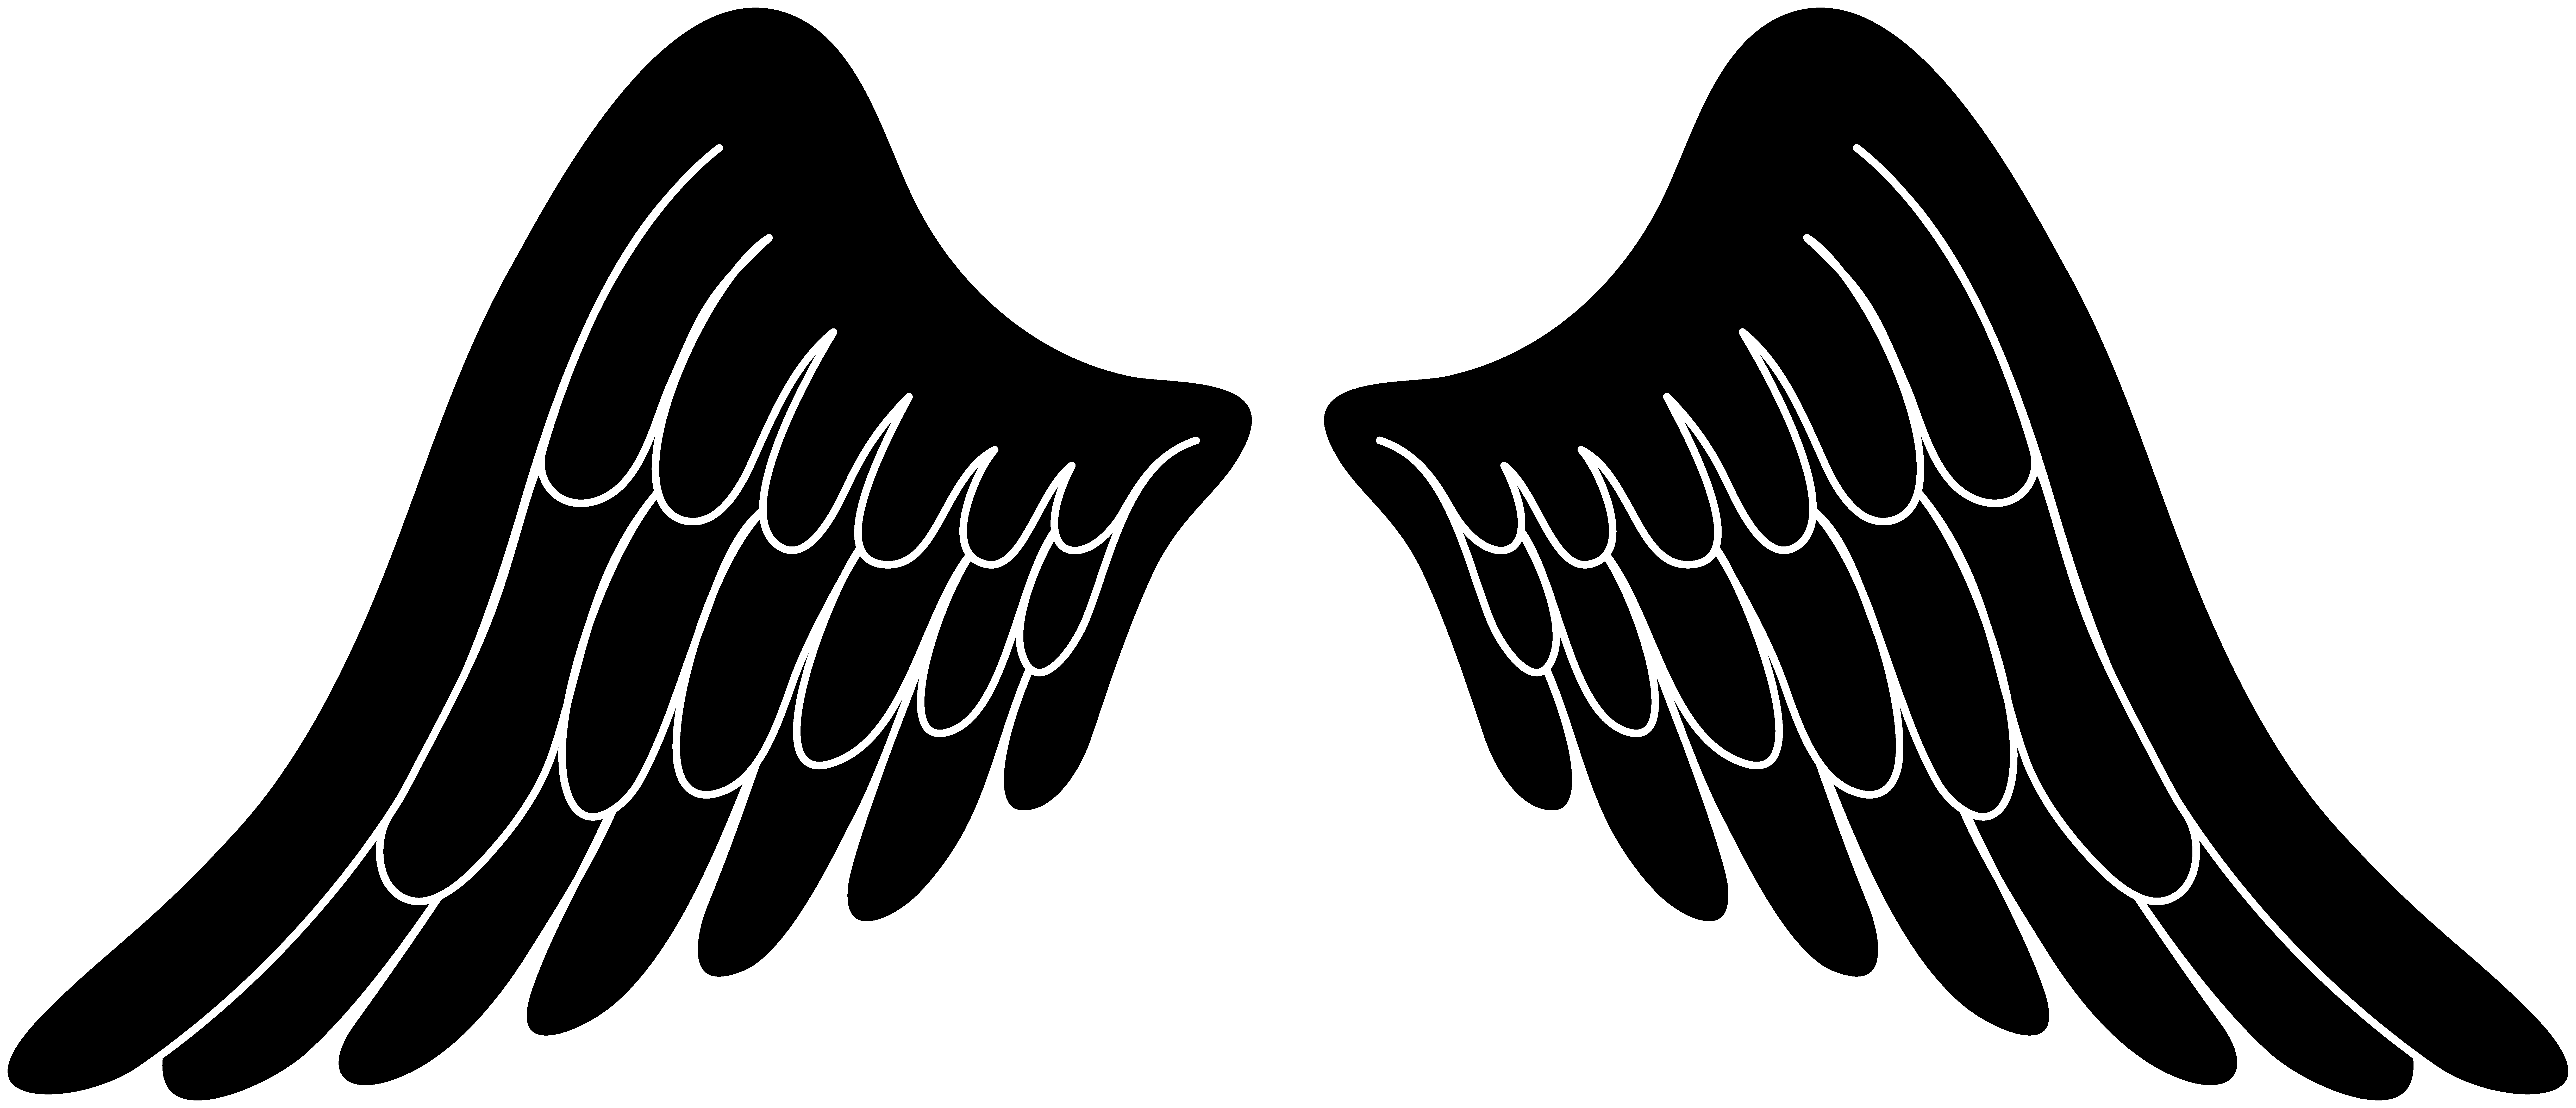 Angel wings angel wing templates clipart clipart kid Clipartix